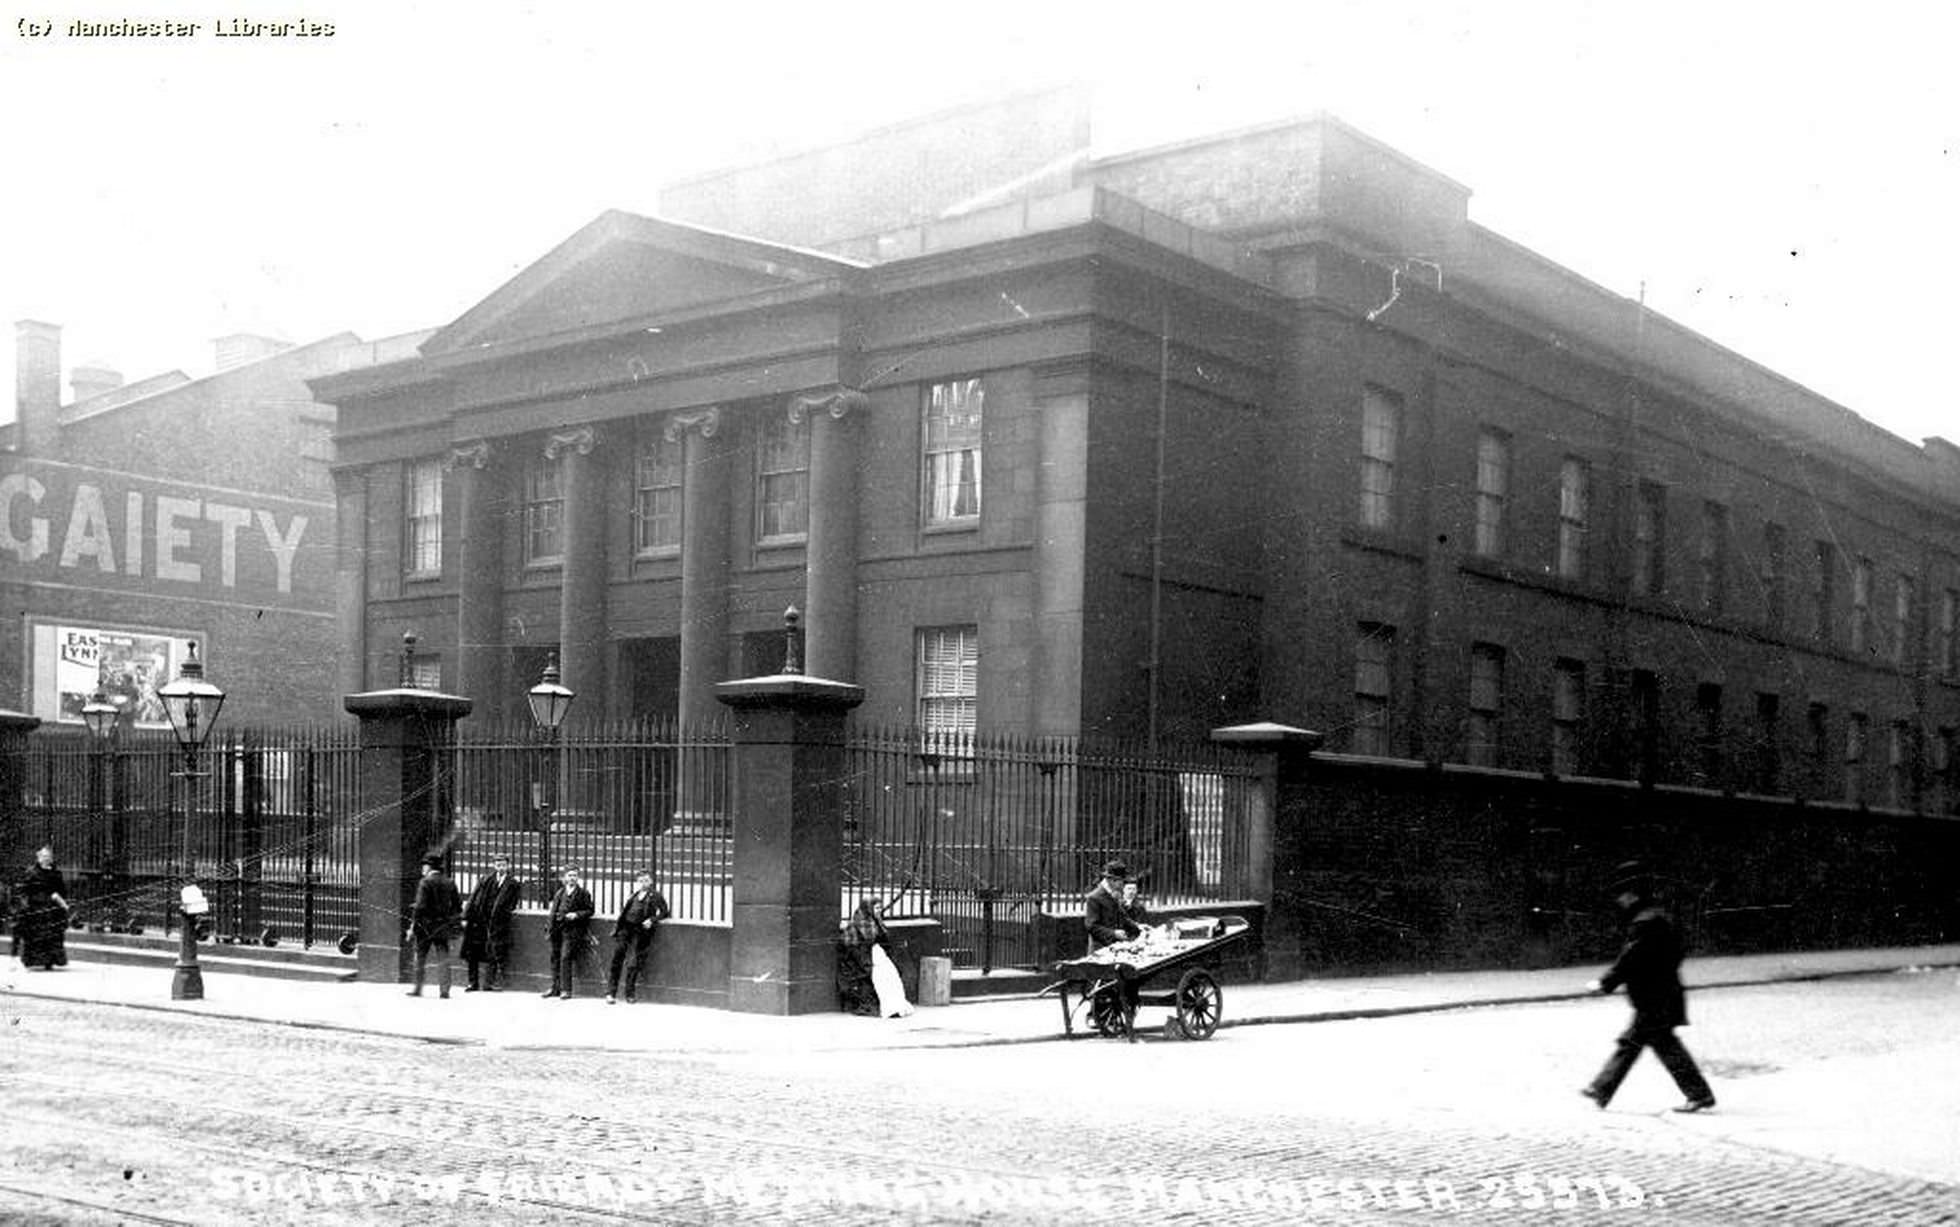 Friends' Meeting House, Mount Street, Quakers, Manchester